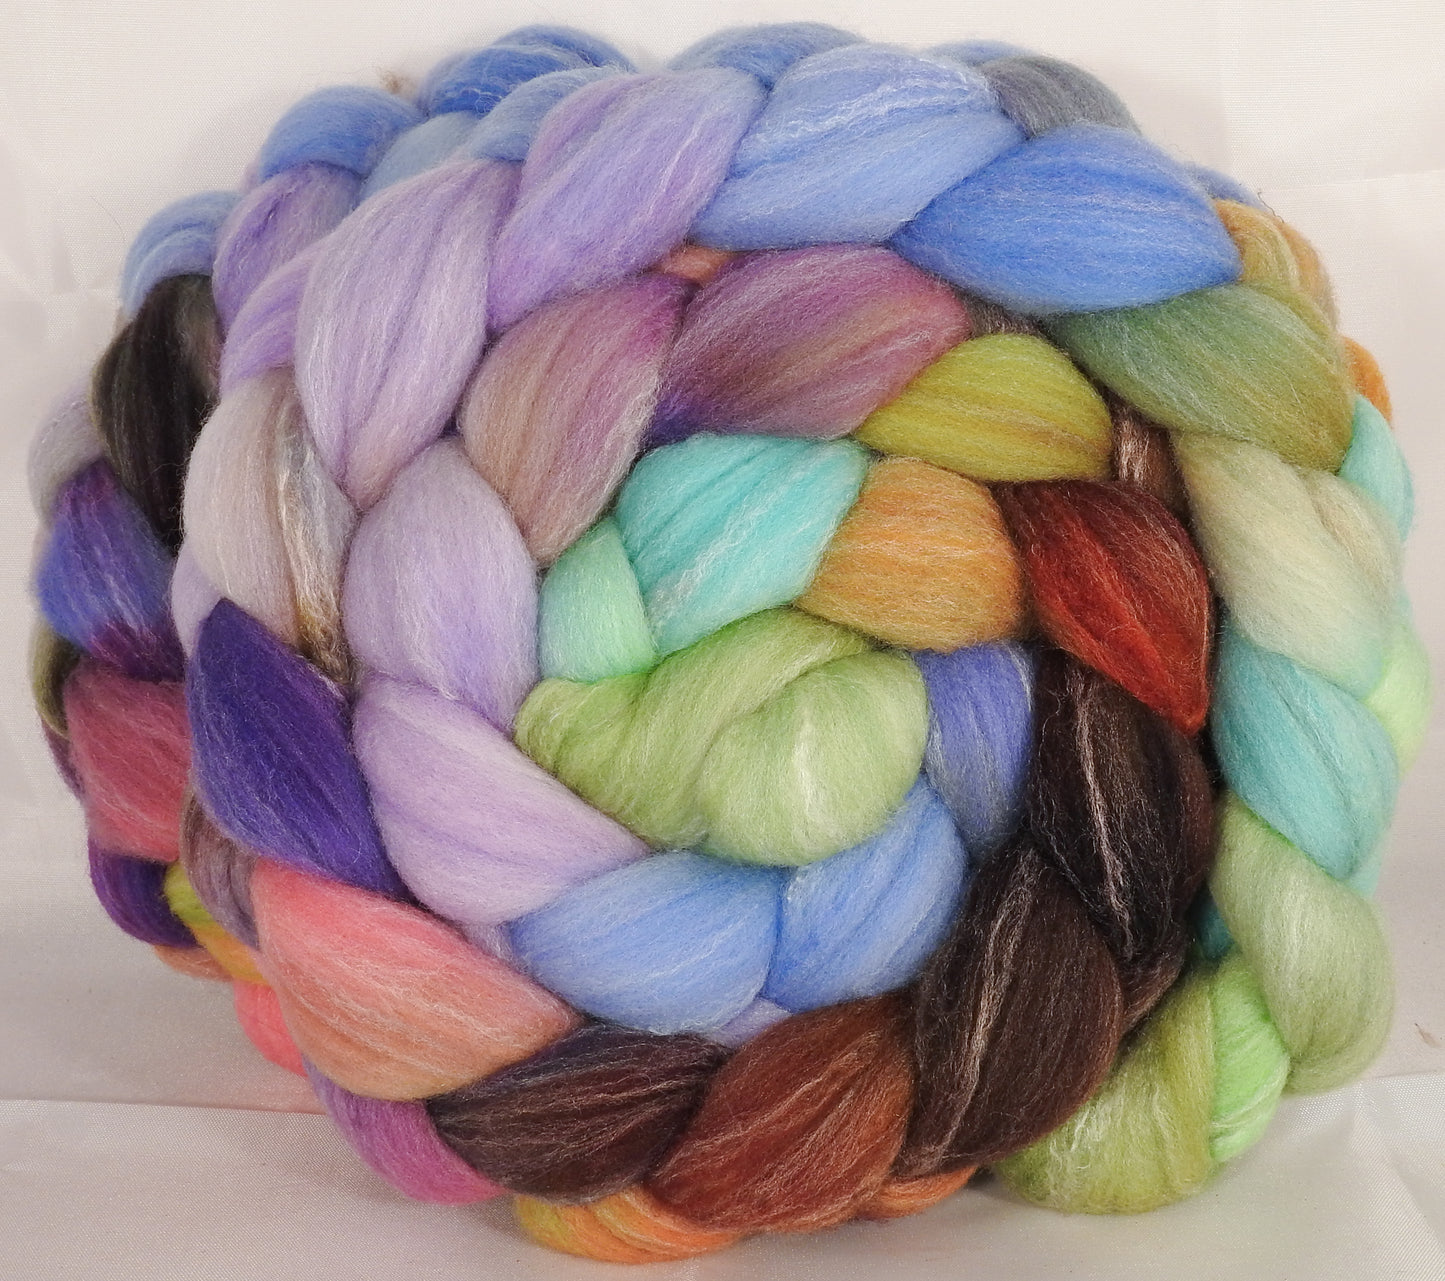 Hand dyed top for spinning -Glass Ornaments- (5.2 oz.) Targhee/silk/ bamboo ( 80/10/10) - Inglenook Fibers